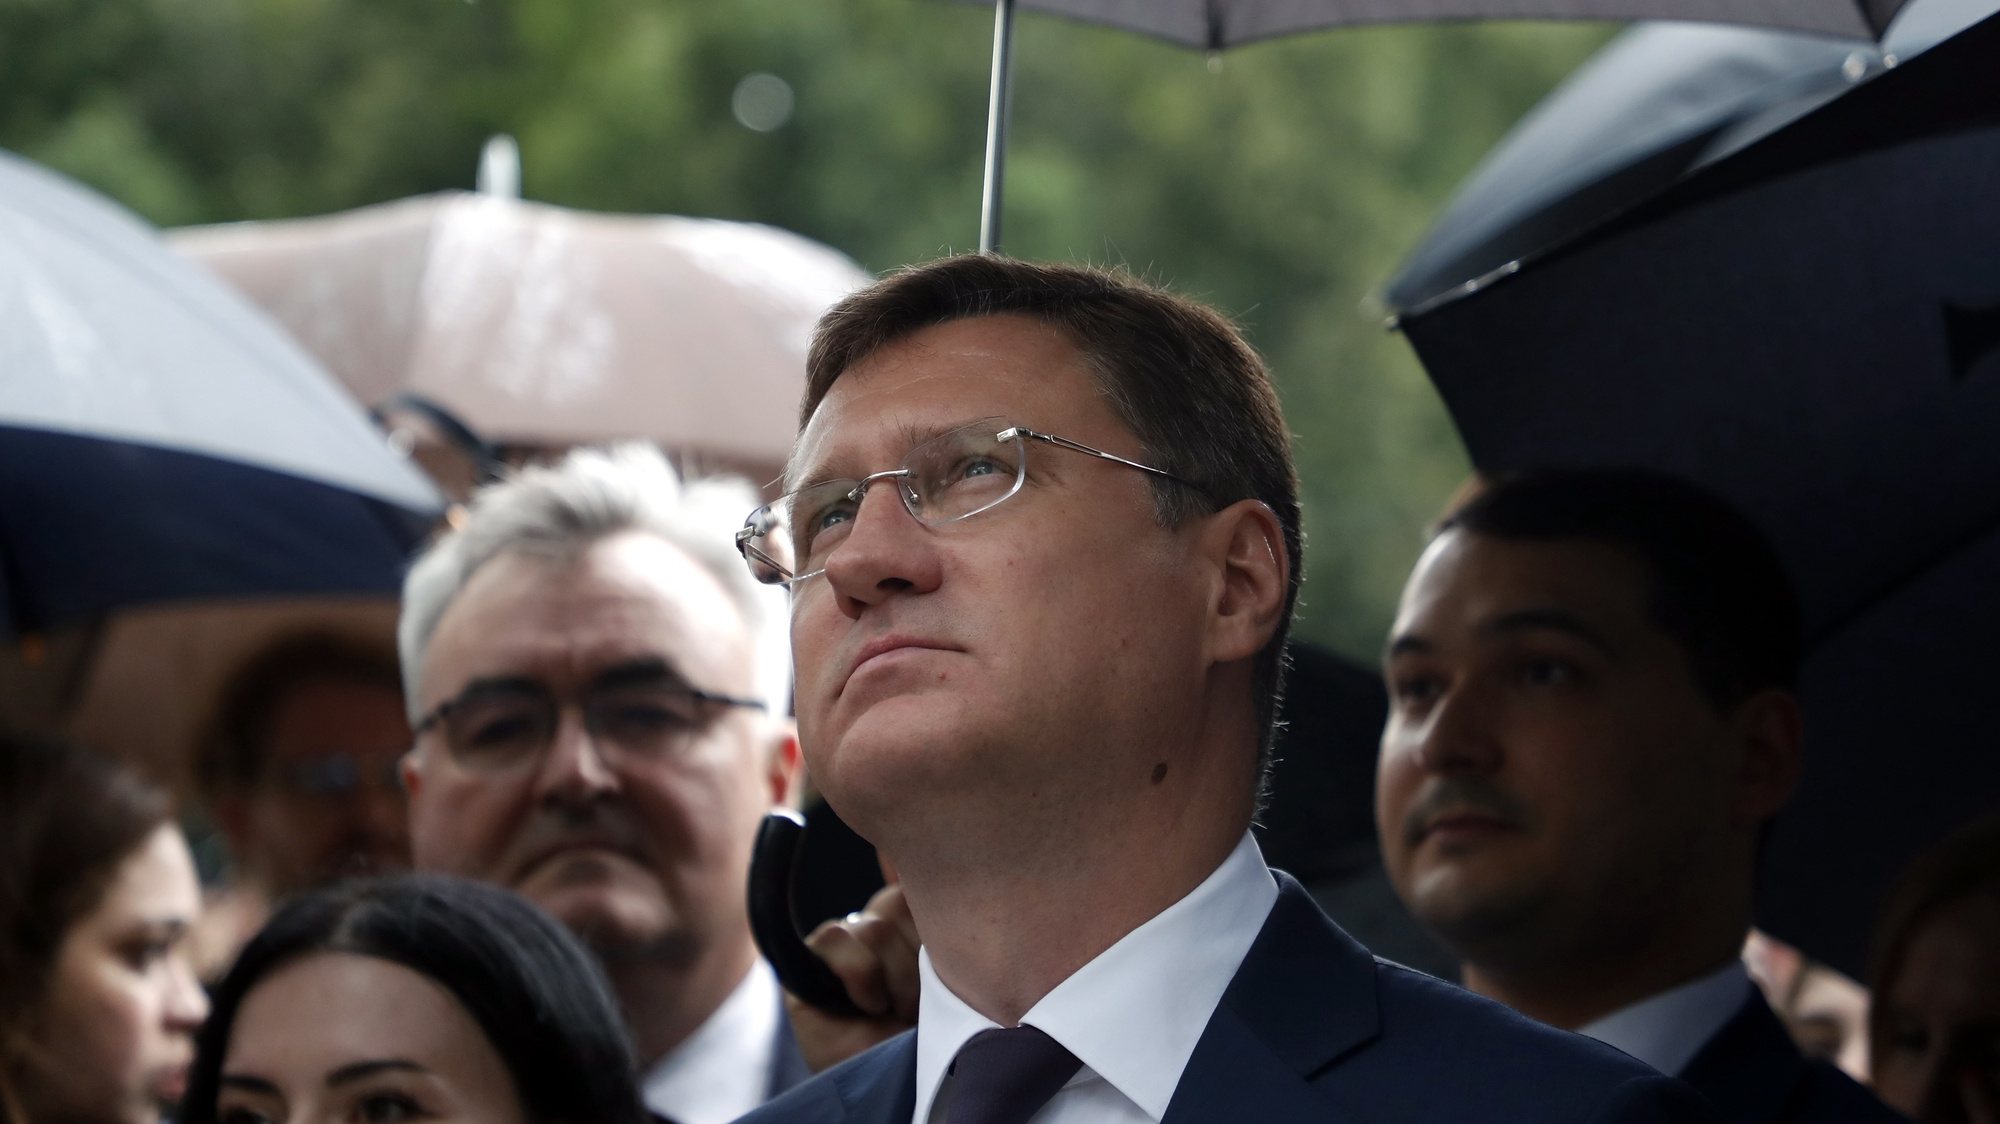 epa10755657 Russian Deputy Prime Minister Alexander Novak (C) attends the opening ceremony of a monument to Venezuelan military and political leader Simon Bolivar (1783-1830) in Moscow, Russia, 19 July 2023. The Moscow monument is a copy of the Simon Bolivar monument in Caracas.  EPA/MAXIM SHIPENKOV